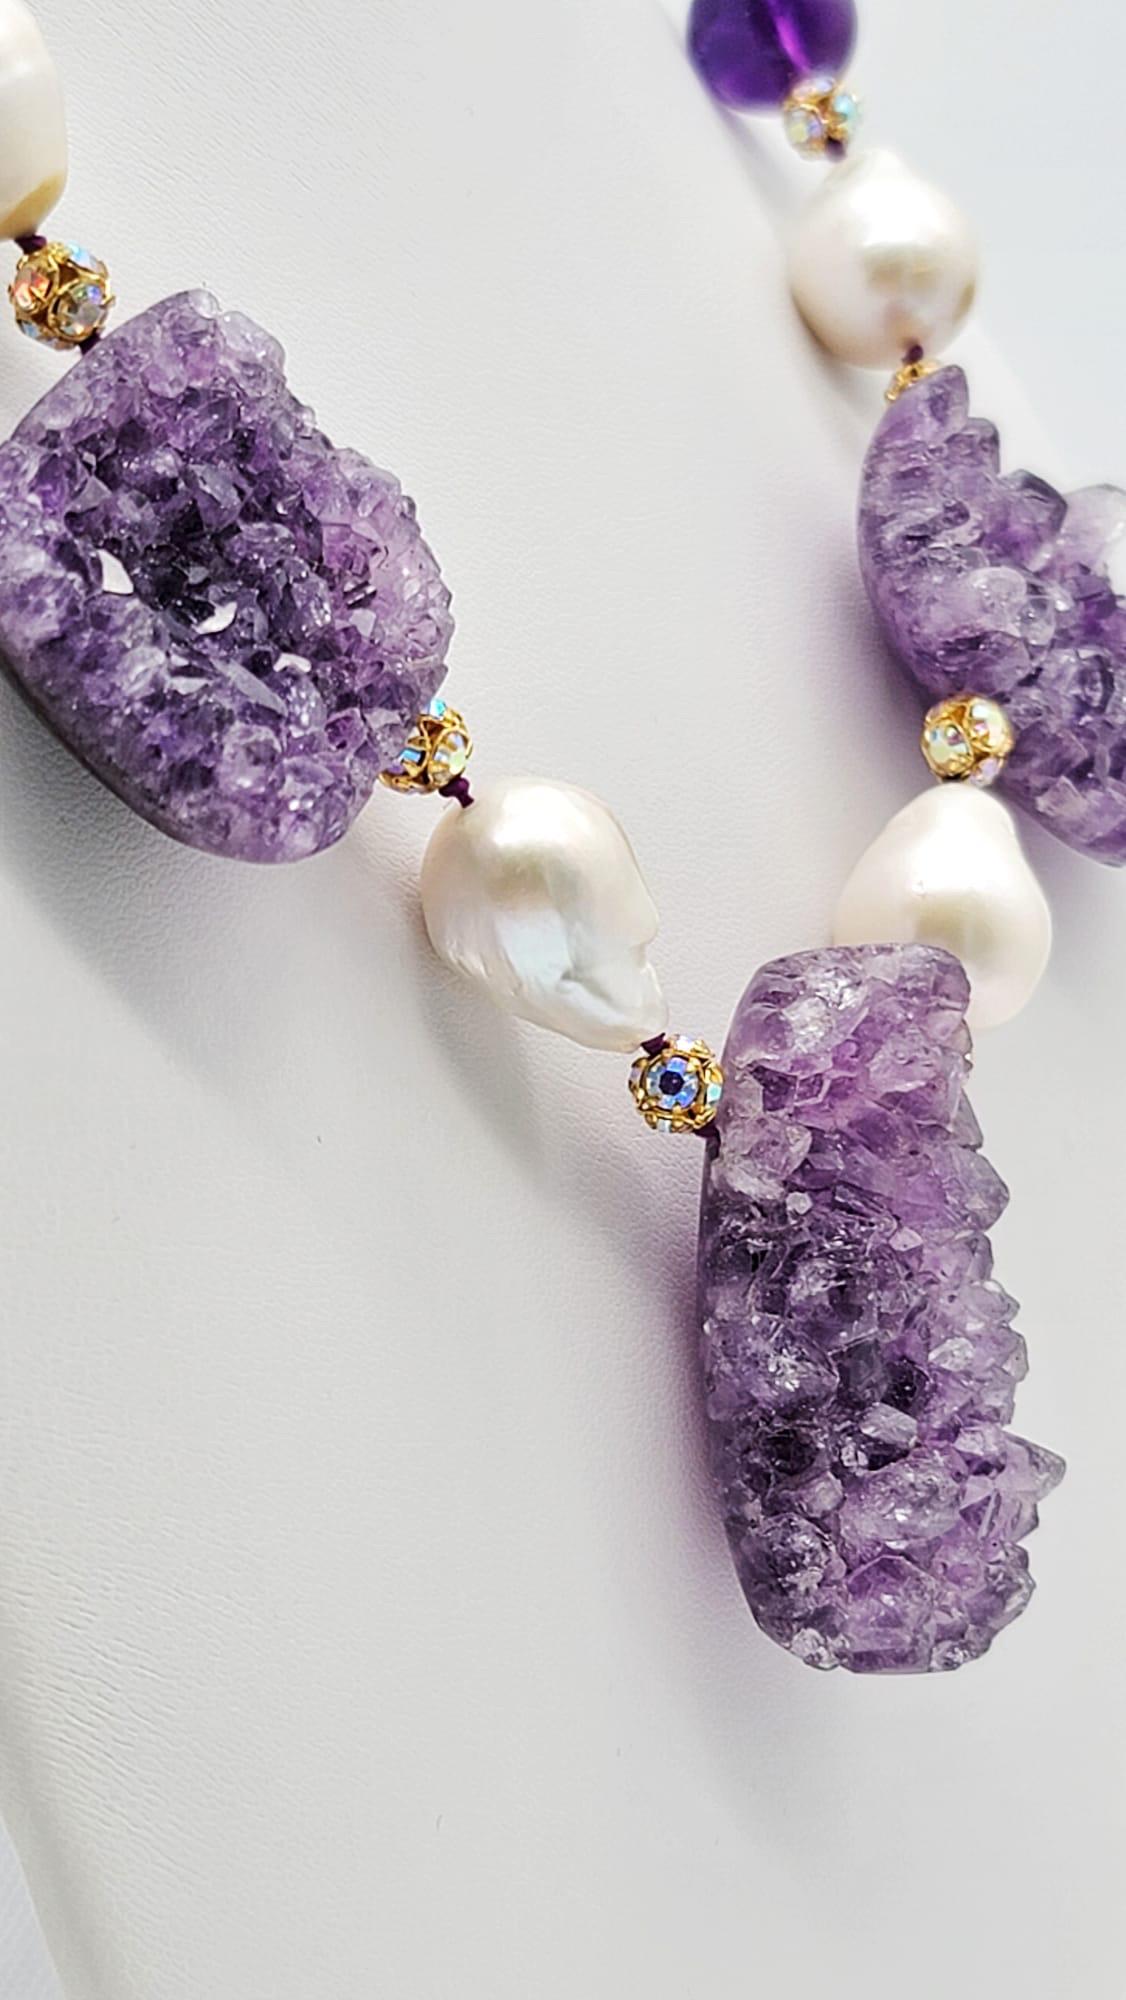 A.Jeschel Spectacular Amethyst Geodes and Baroque Pearl Necklace